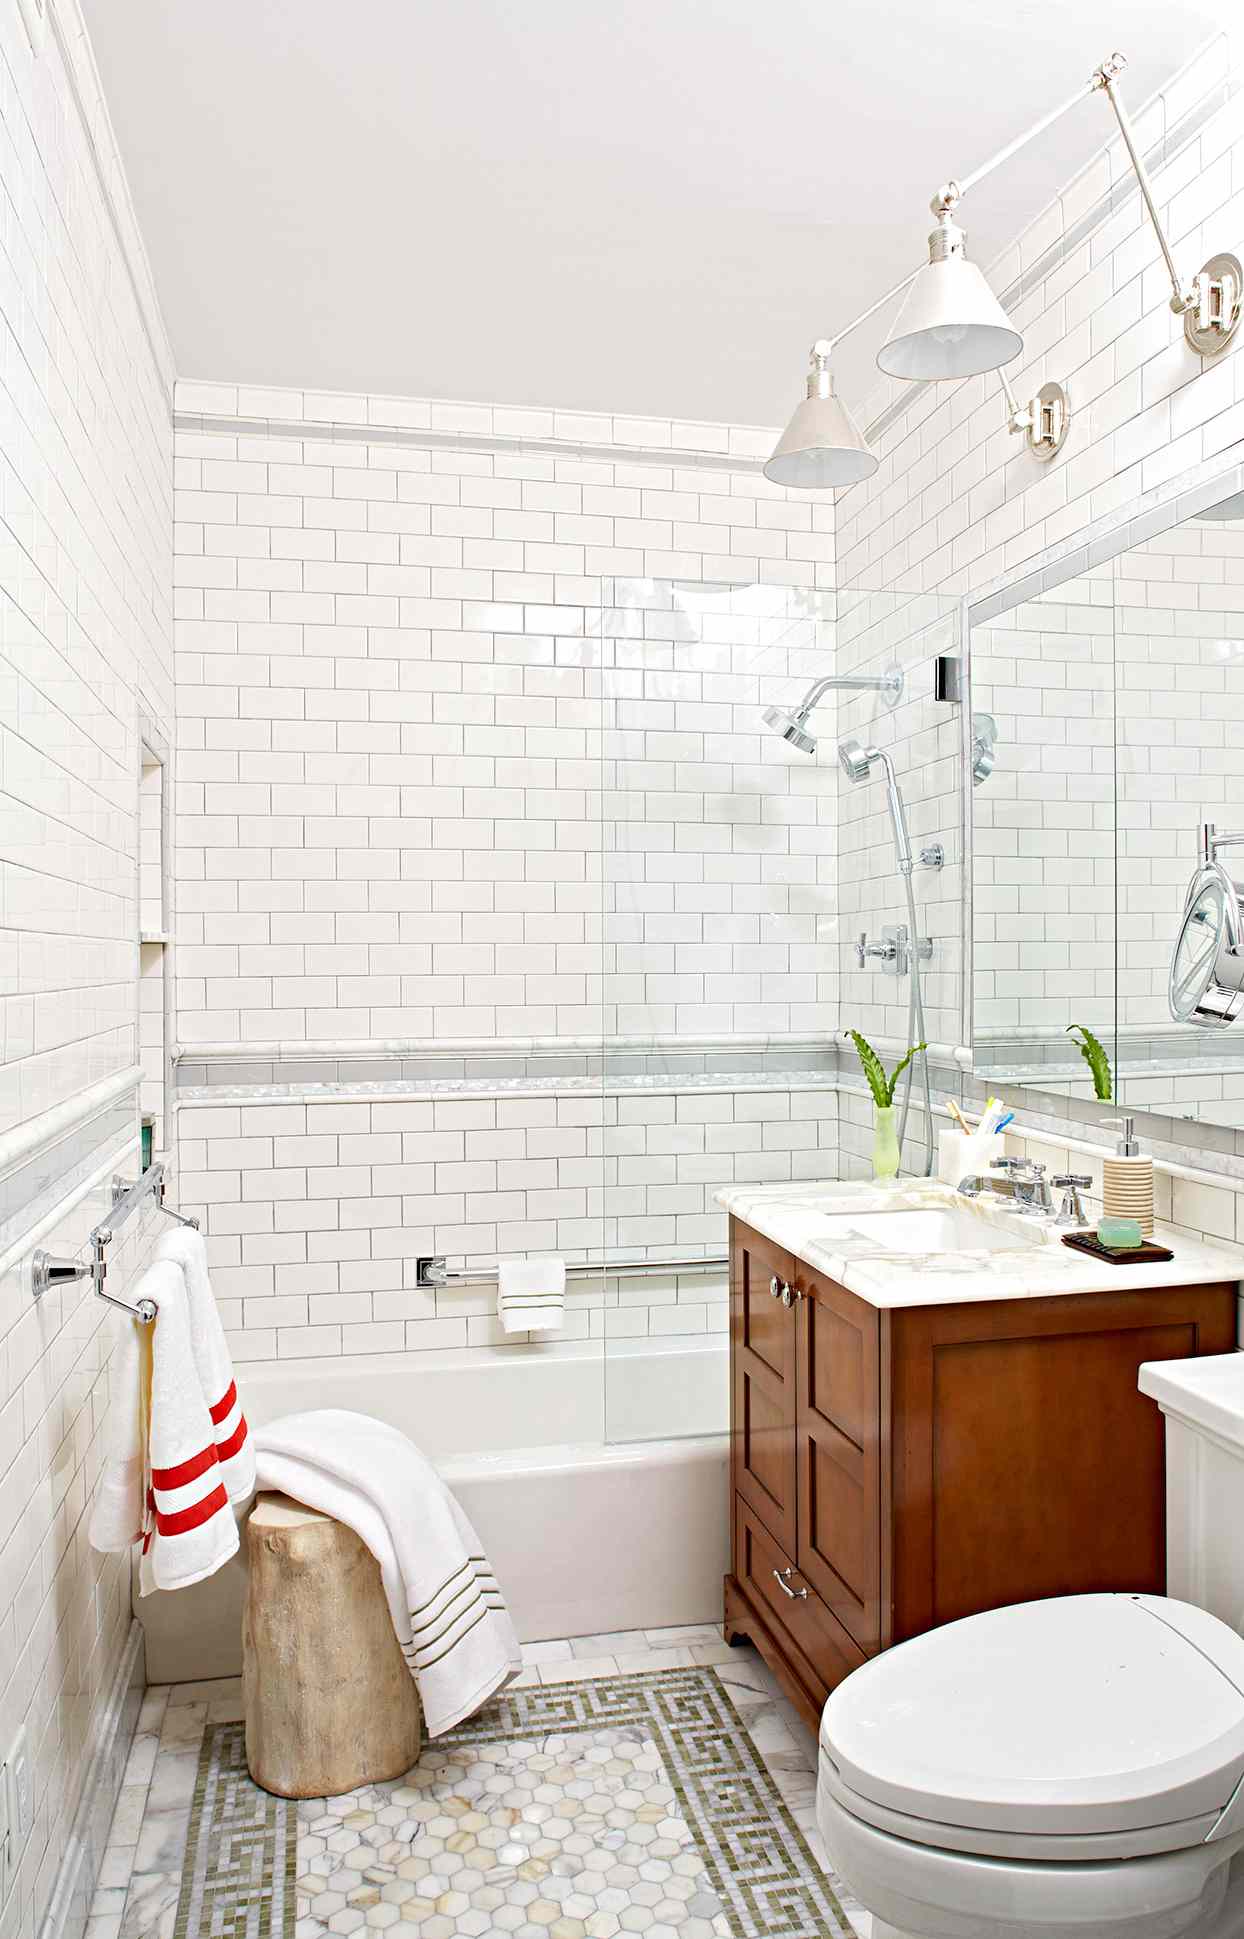 Bathroom with wooden cabinet and subway tile